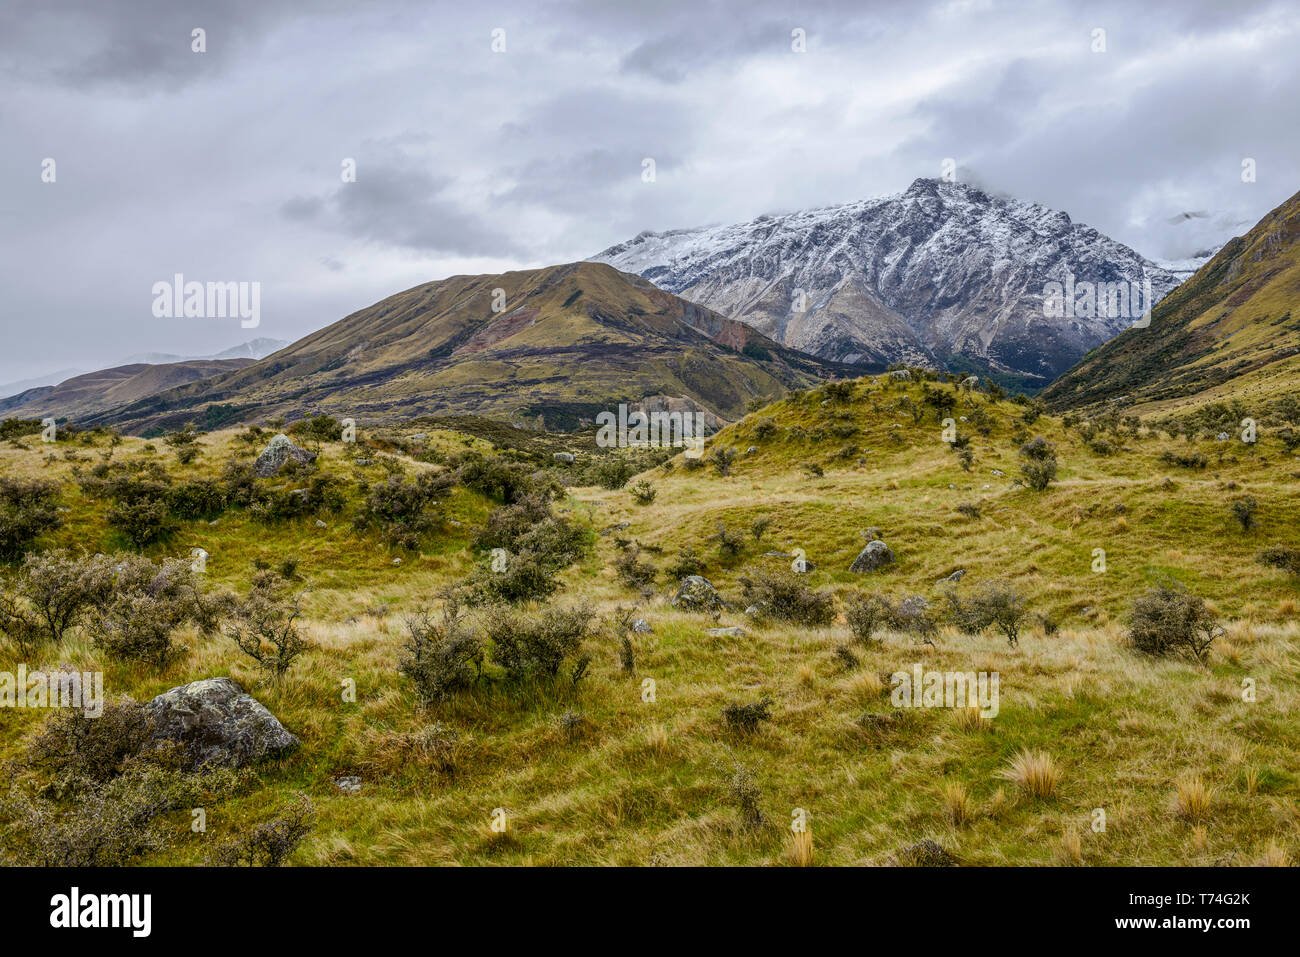 Snowy mountains viewed from Mount Cook Road; South Island, New Zealand Stock Photo